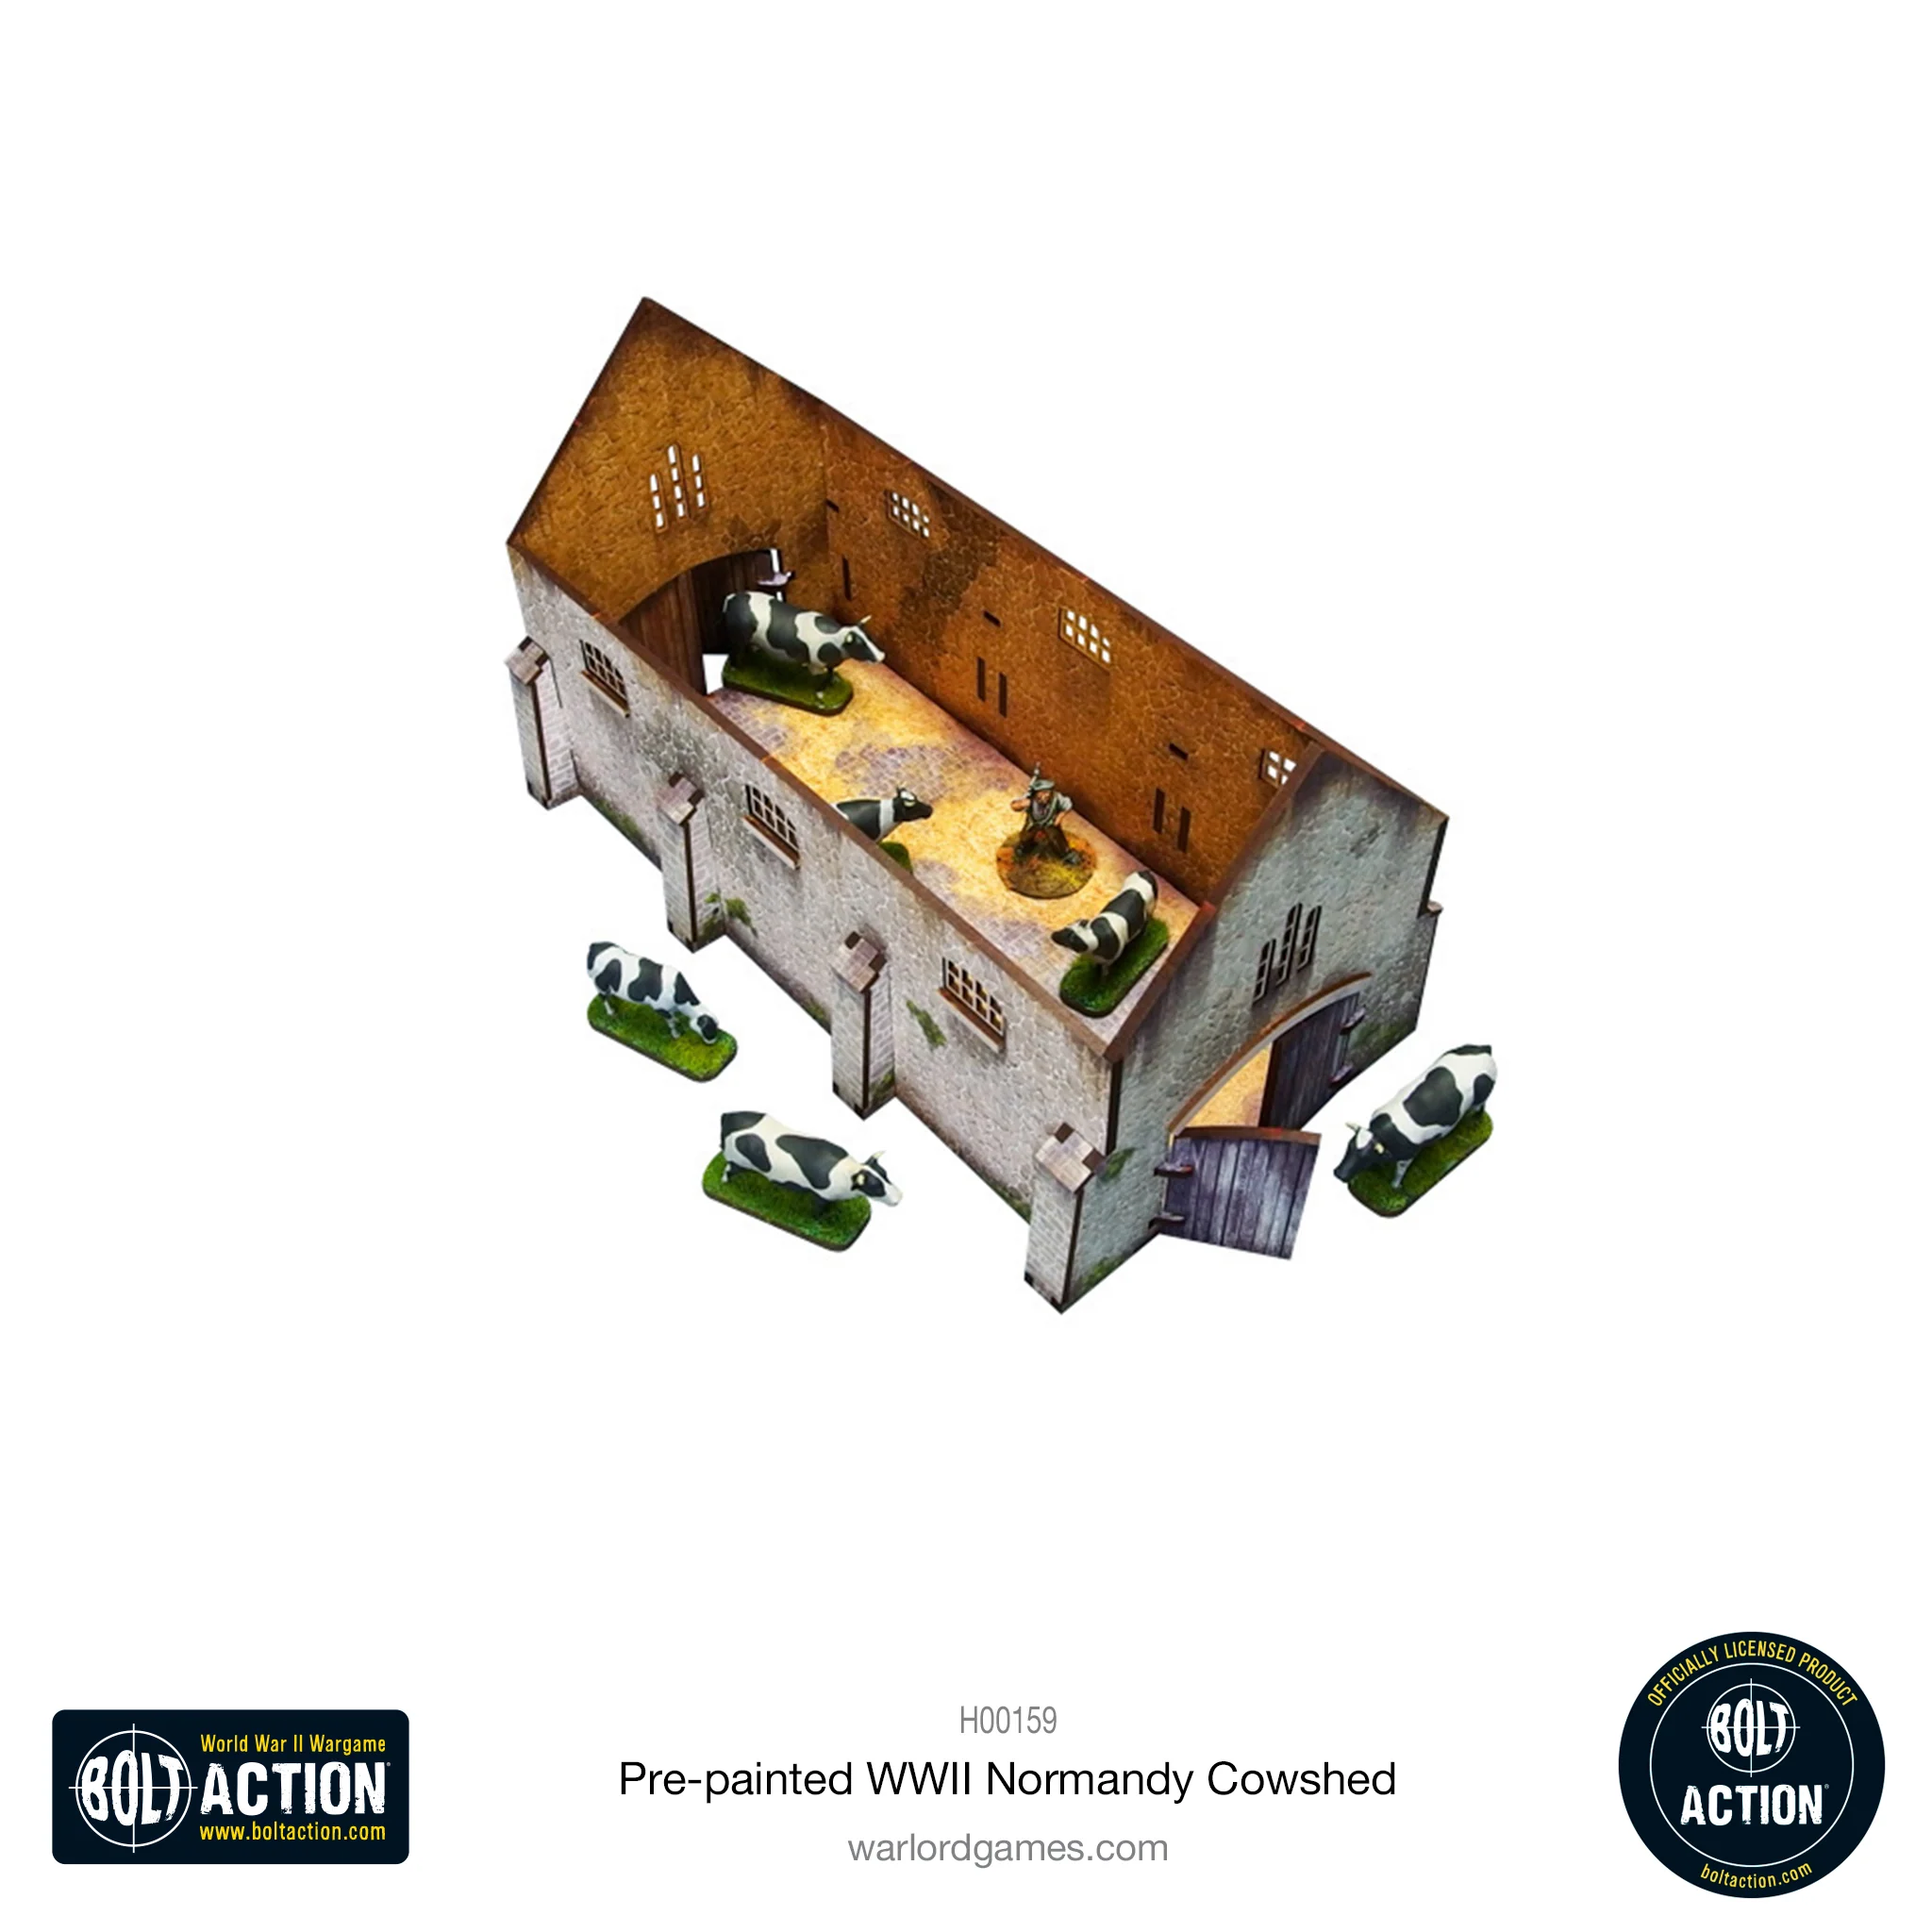 Bolt Action: Pre-painted WWII Normandy Cowshed-1711116072-nyemq.webp